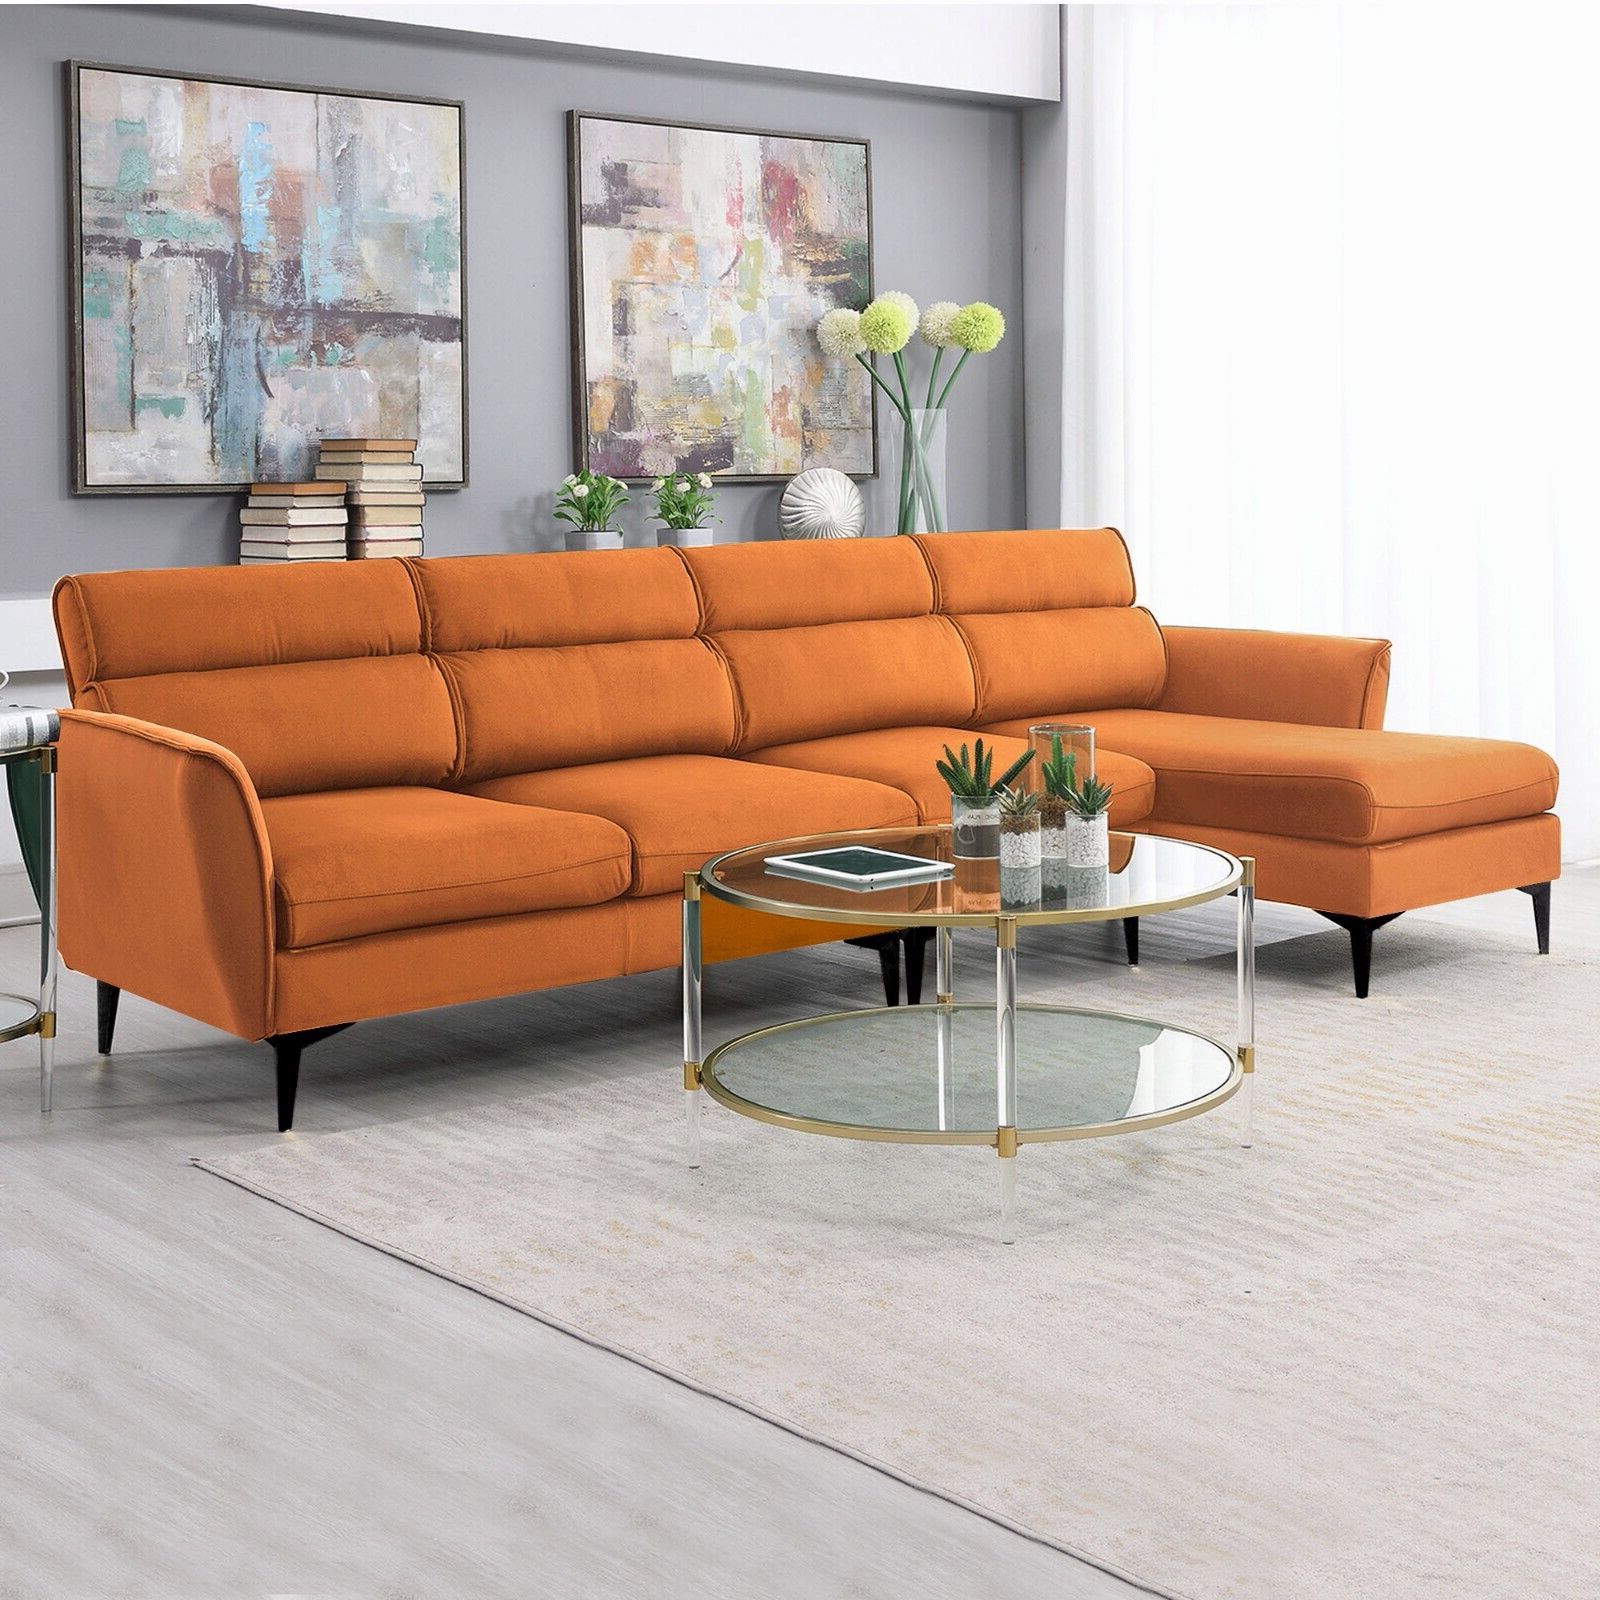 Modern Convertible Sectional Sofa Modular Couch With Reversible Chaise  Metal Leg – Asa College: Florida Within Sectional Couches With Reversible Chaises (Gallery 11 of 20)